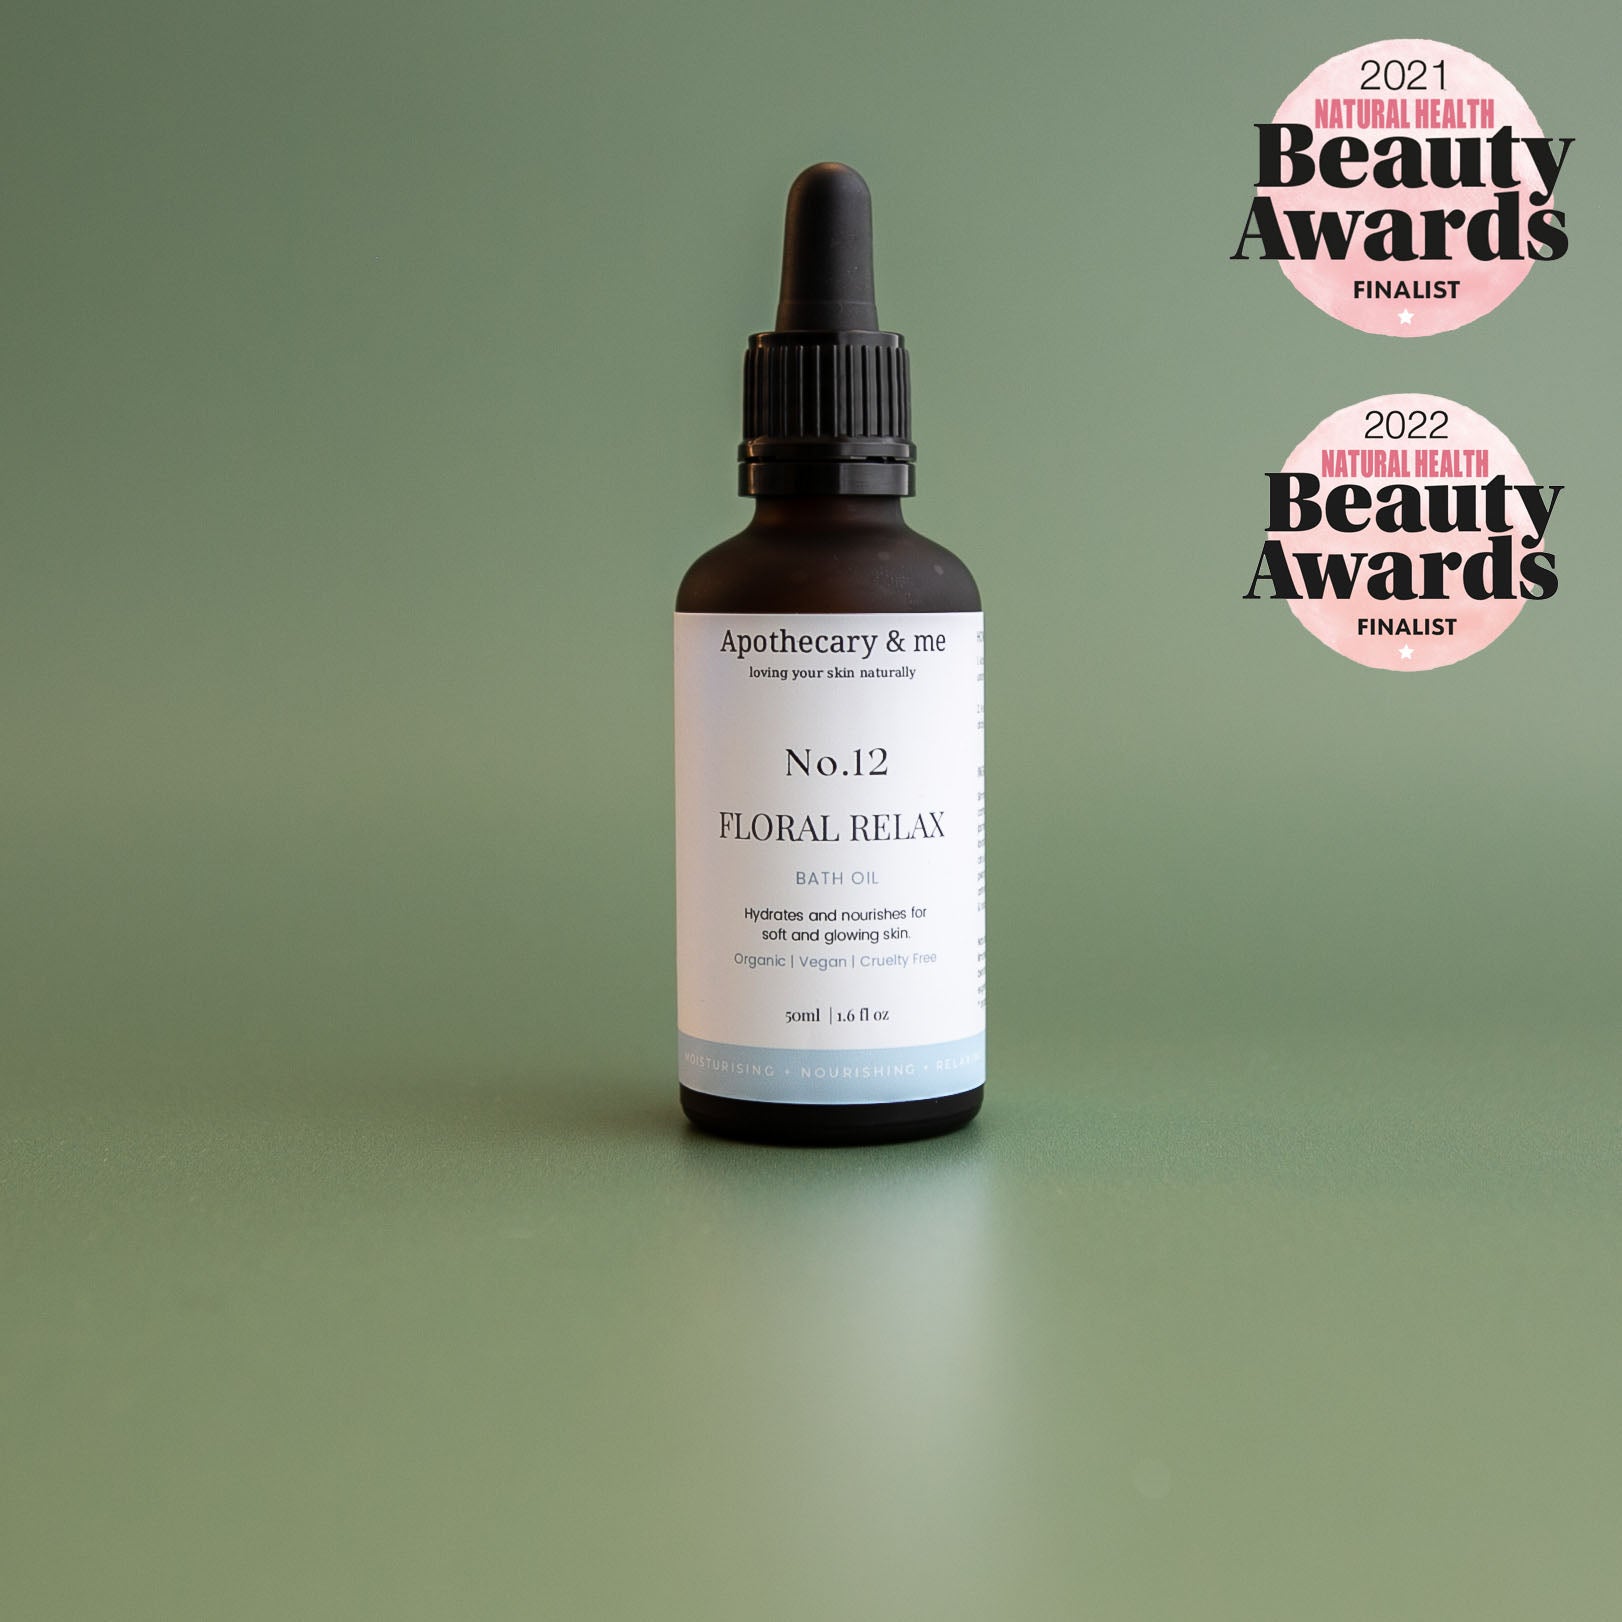 Floral Relax Bath Oil, Natural Health Beauty Awards